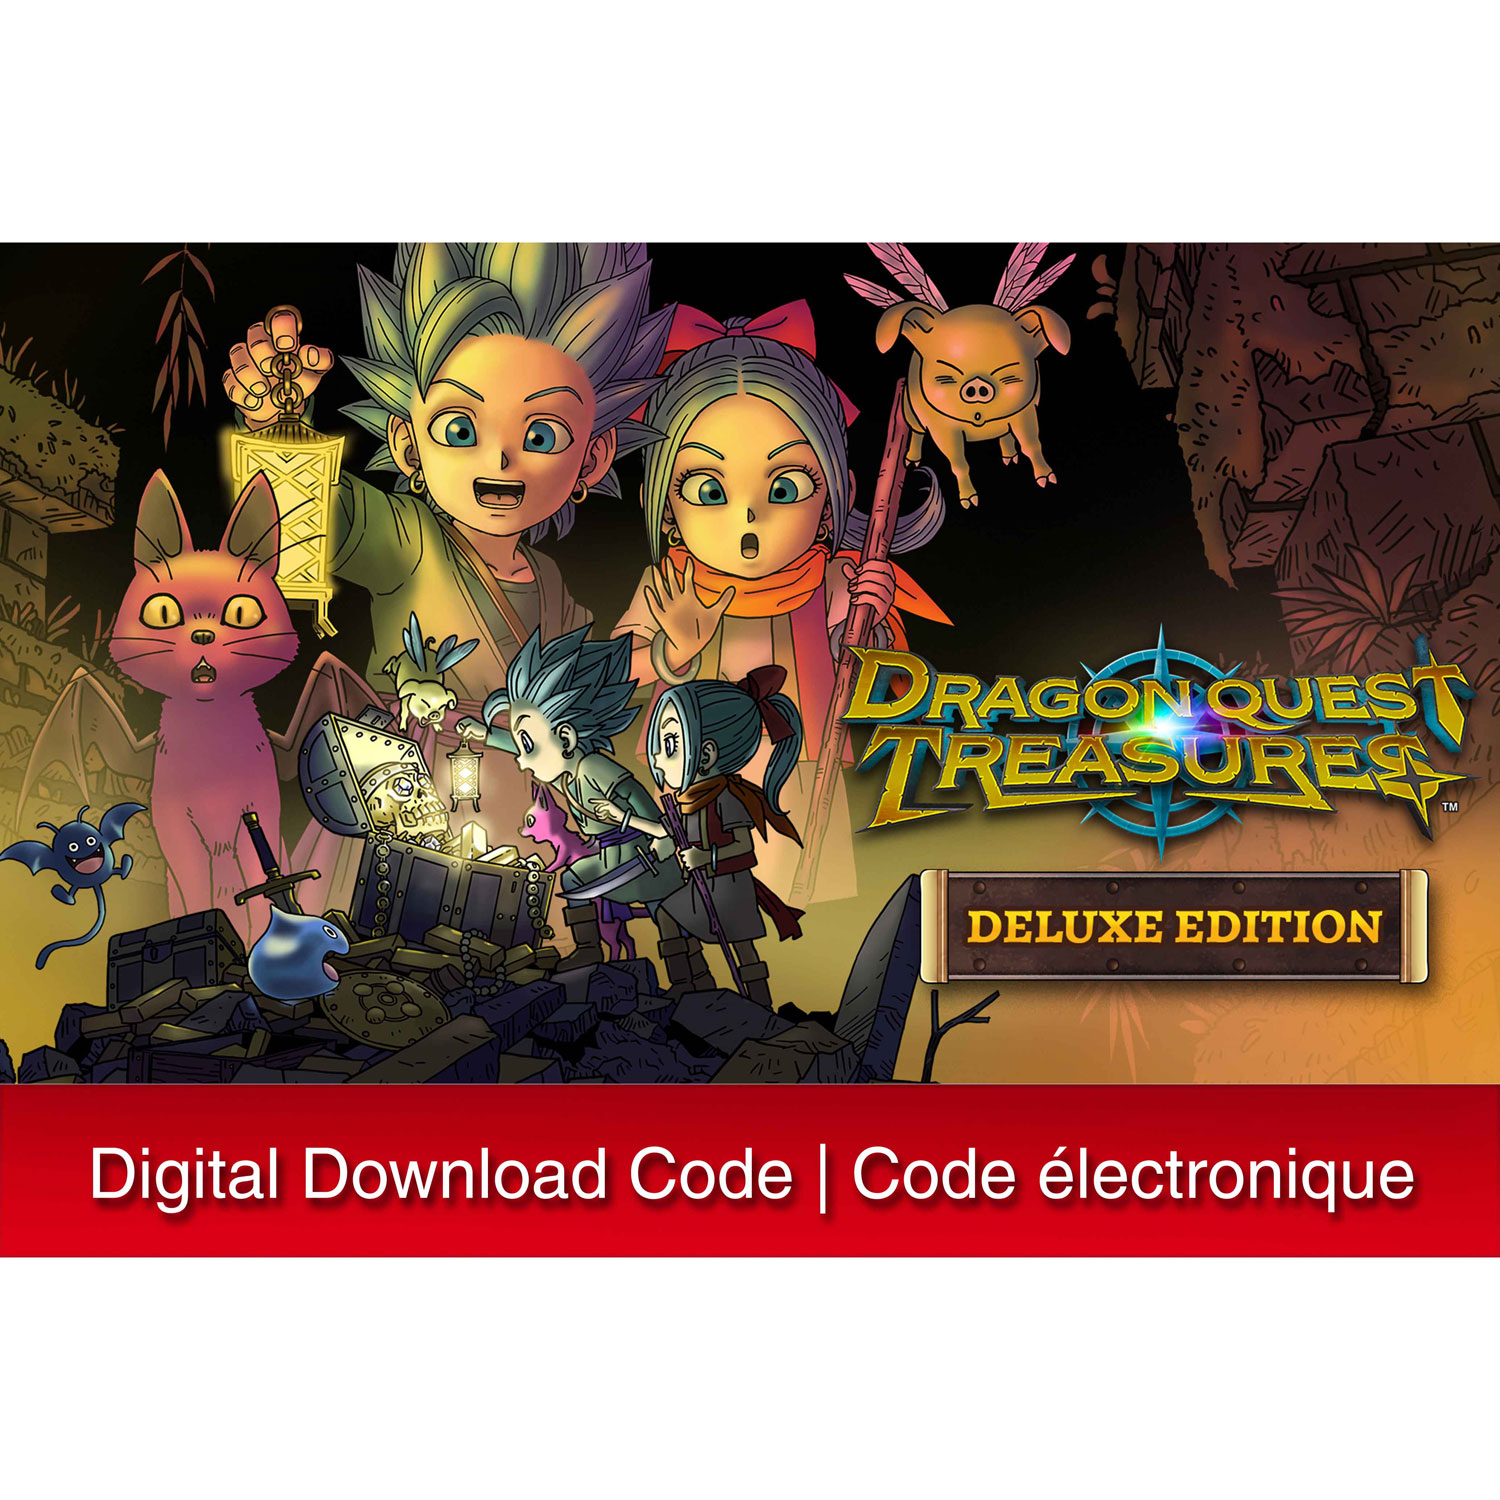 Dragon Quest Treasures Deluxe Edition (Switch) - Digital Download